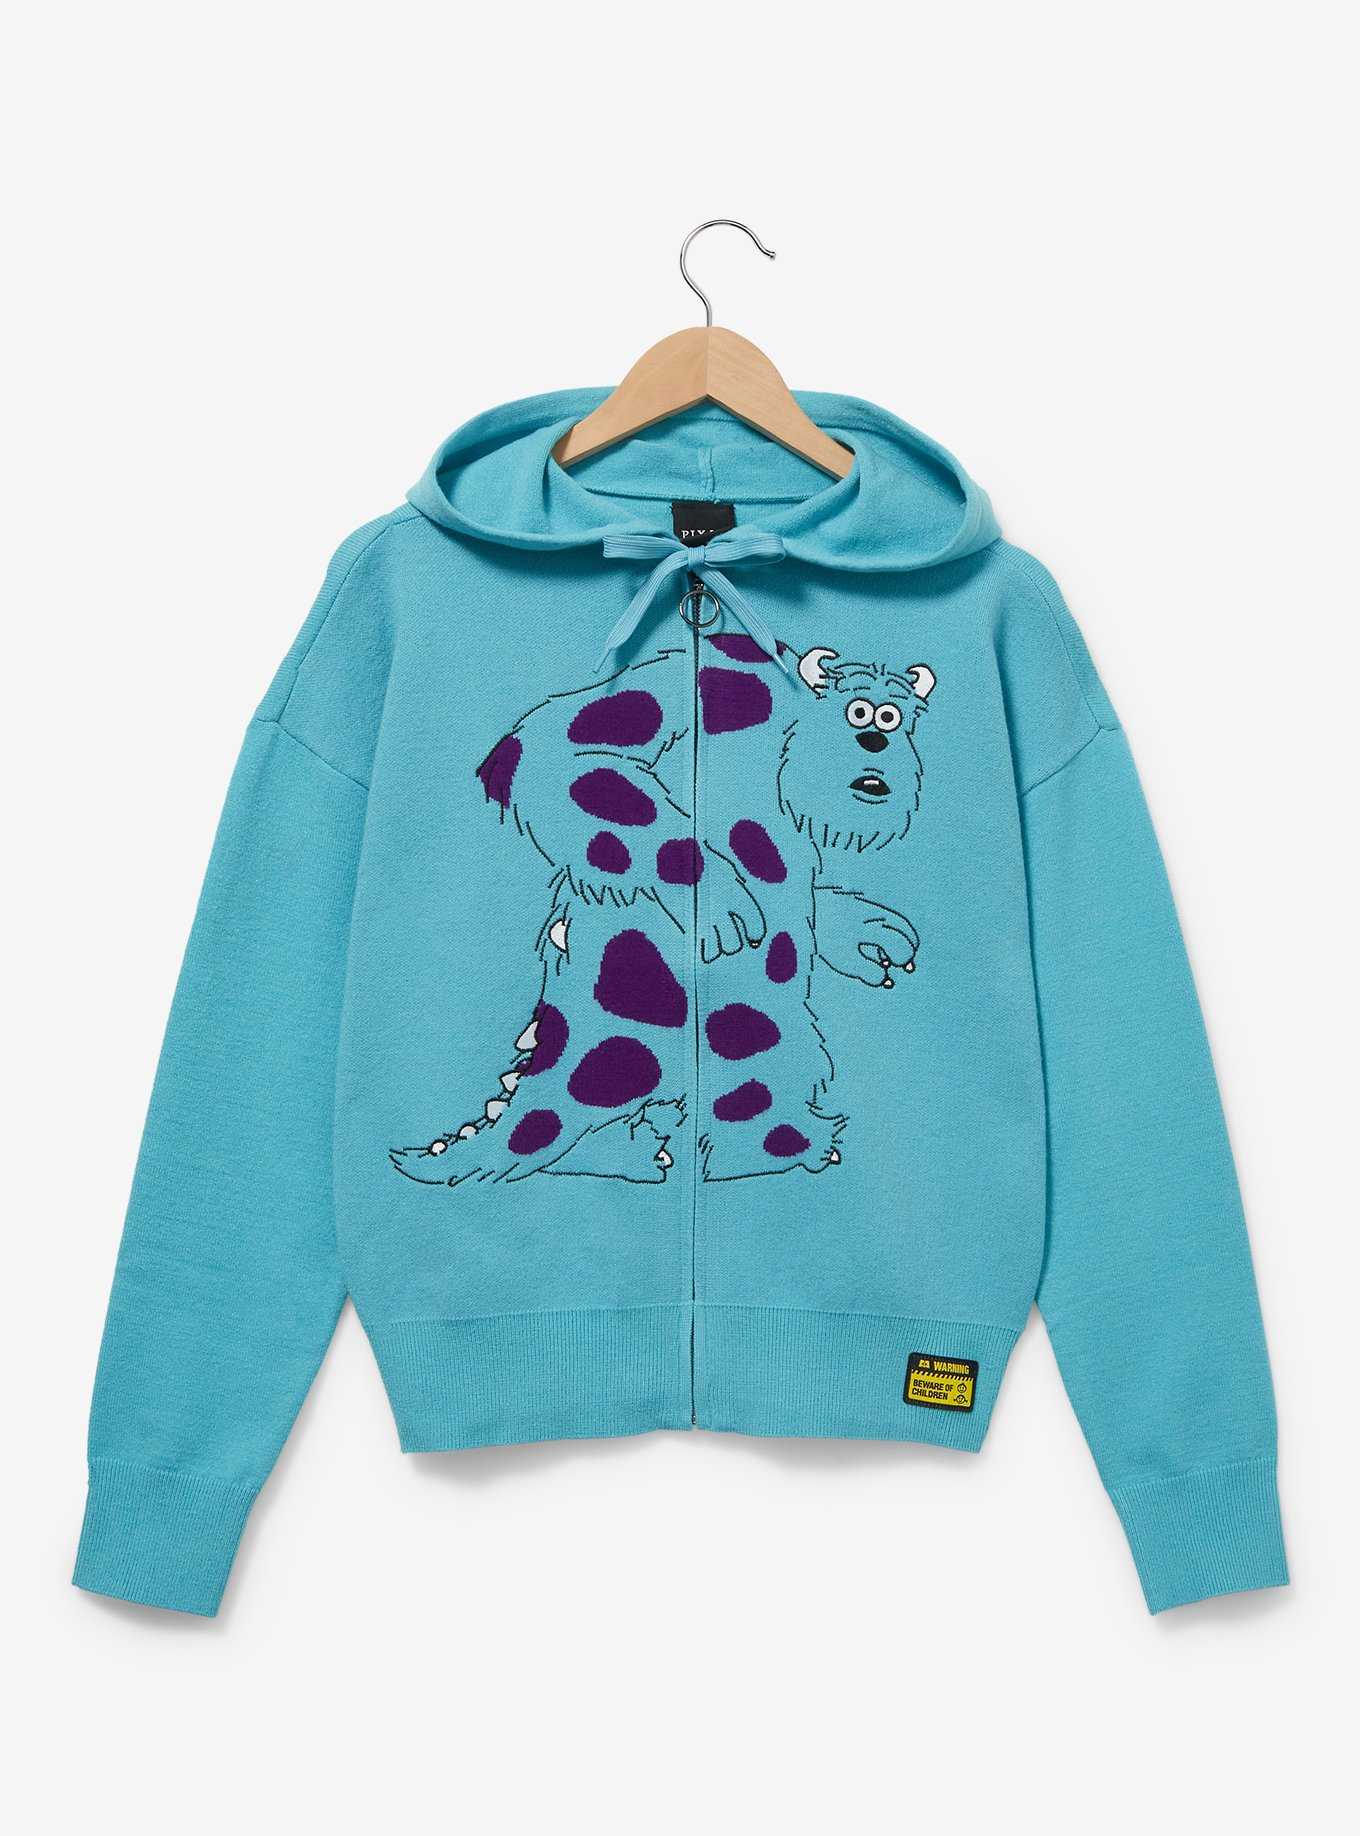 Disney Pixar Monsters, Inc. Sully Knit Zippered Hoodie Plus Size, , hi-res